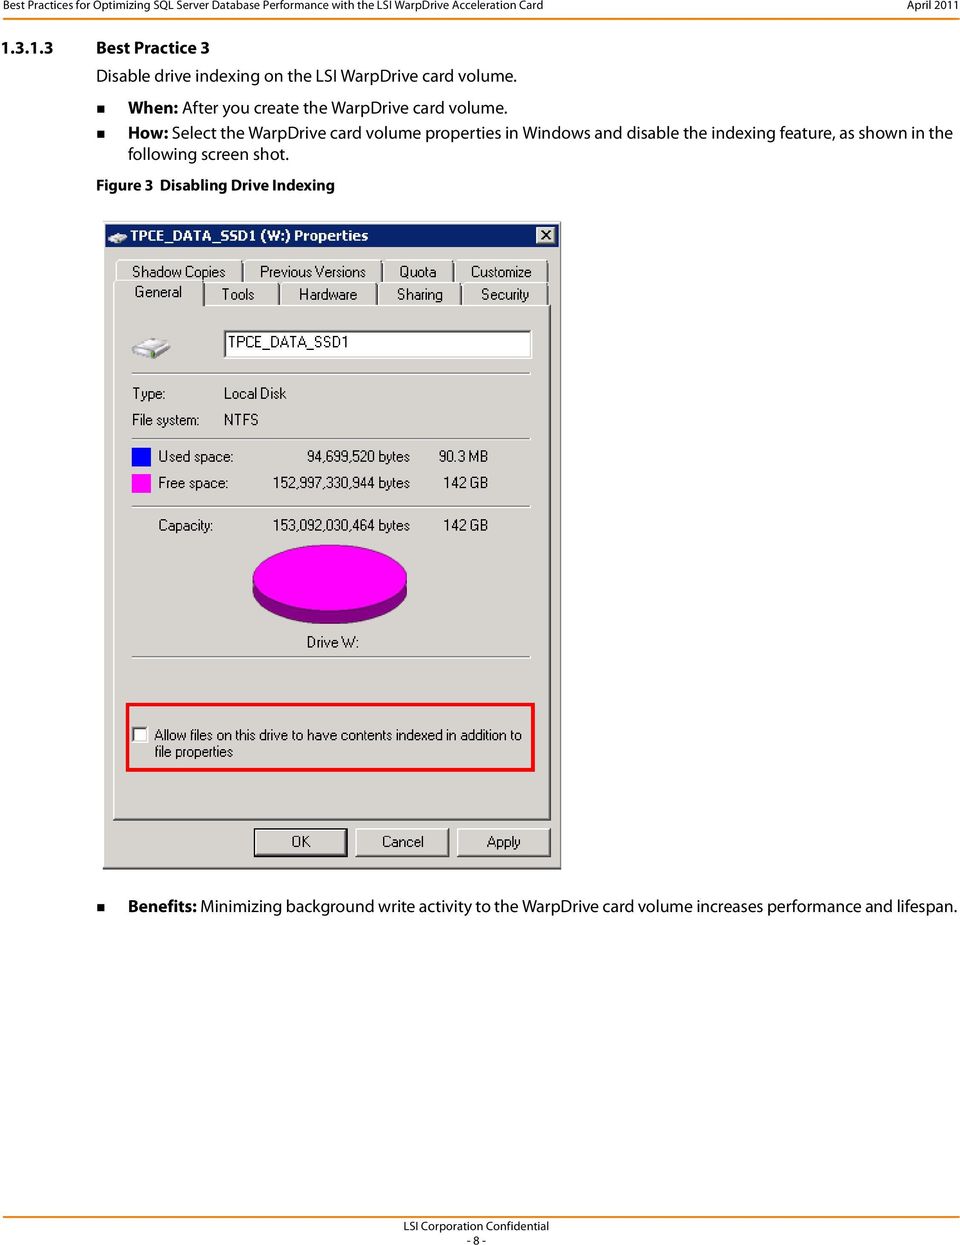 How: Select the WarpDrive card volume properties in Windows and disable the indexing feature, as shown